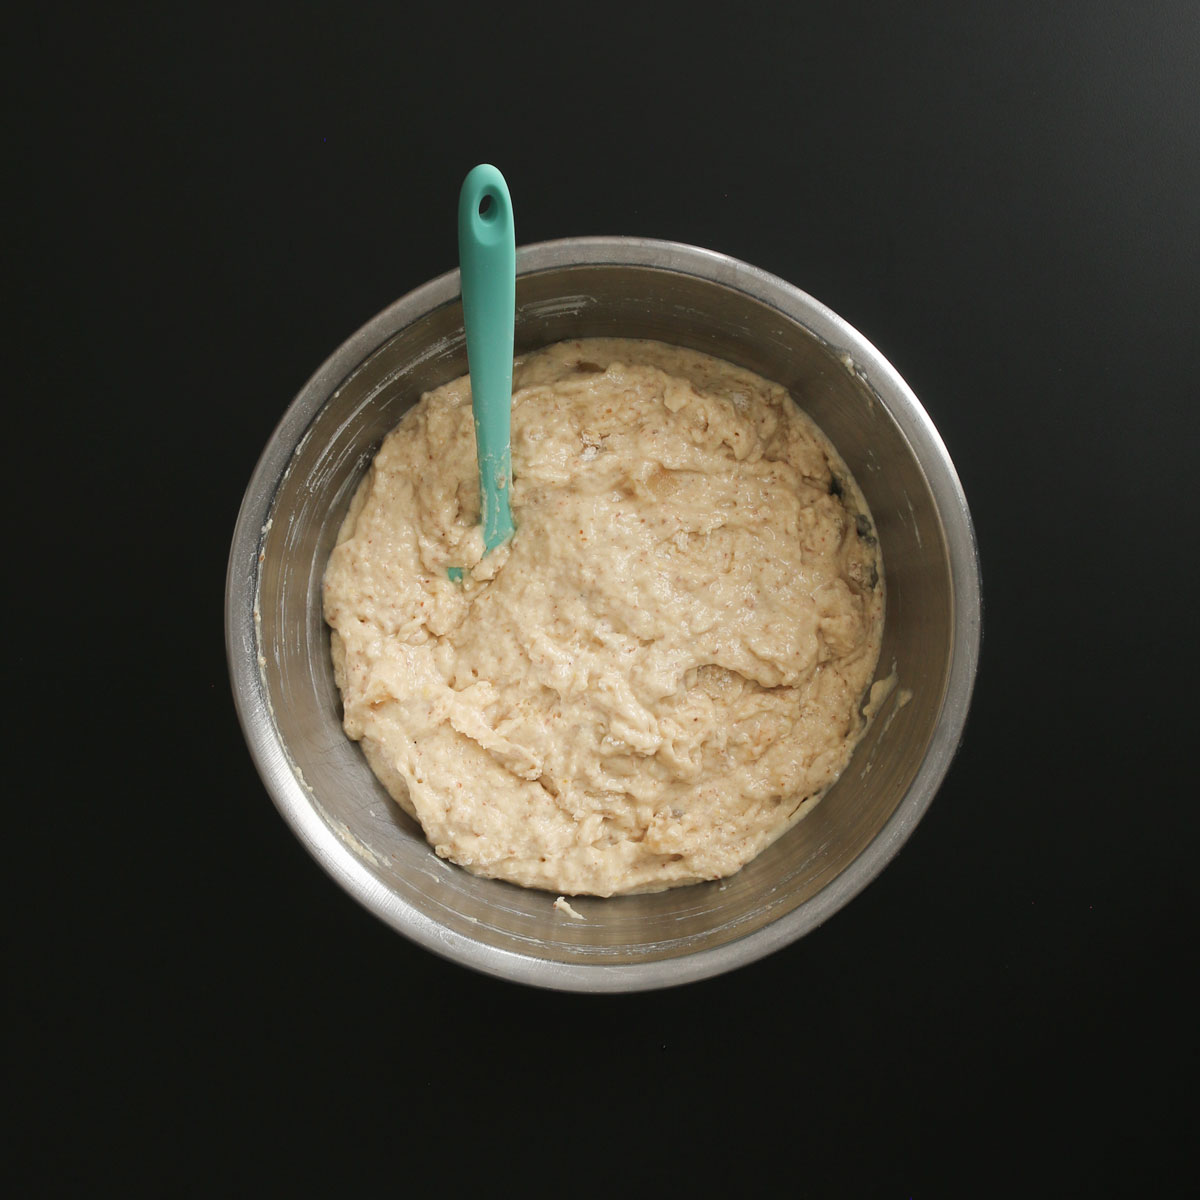 mixed muffin batter in a large mixing bowl with a teal rubber spatula.